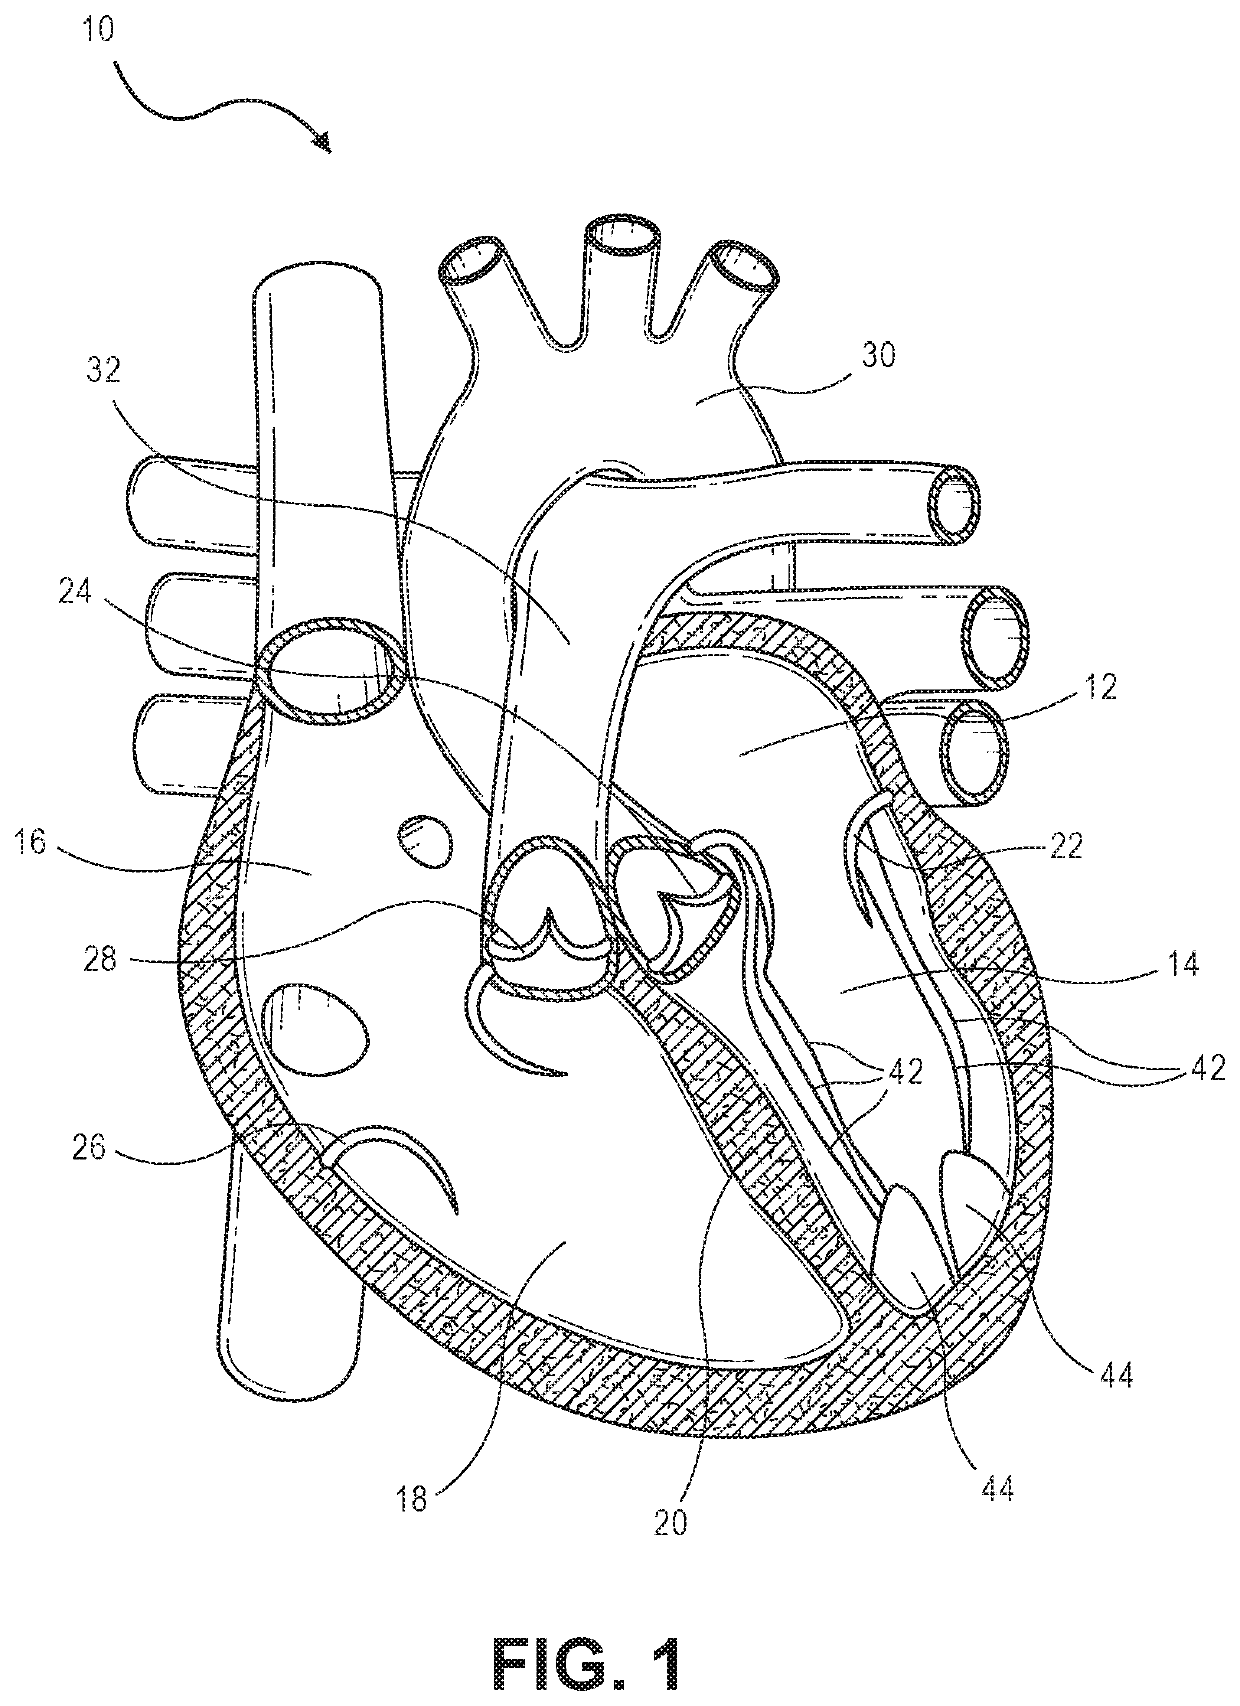 Beating-heart mitral valve chordae replacement